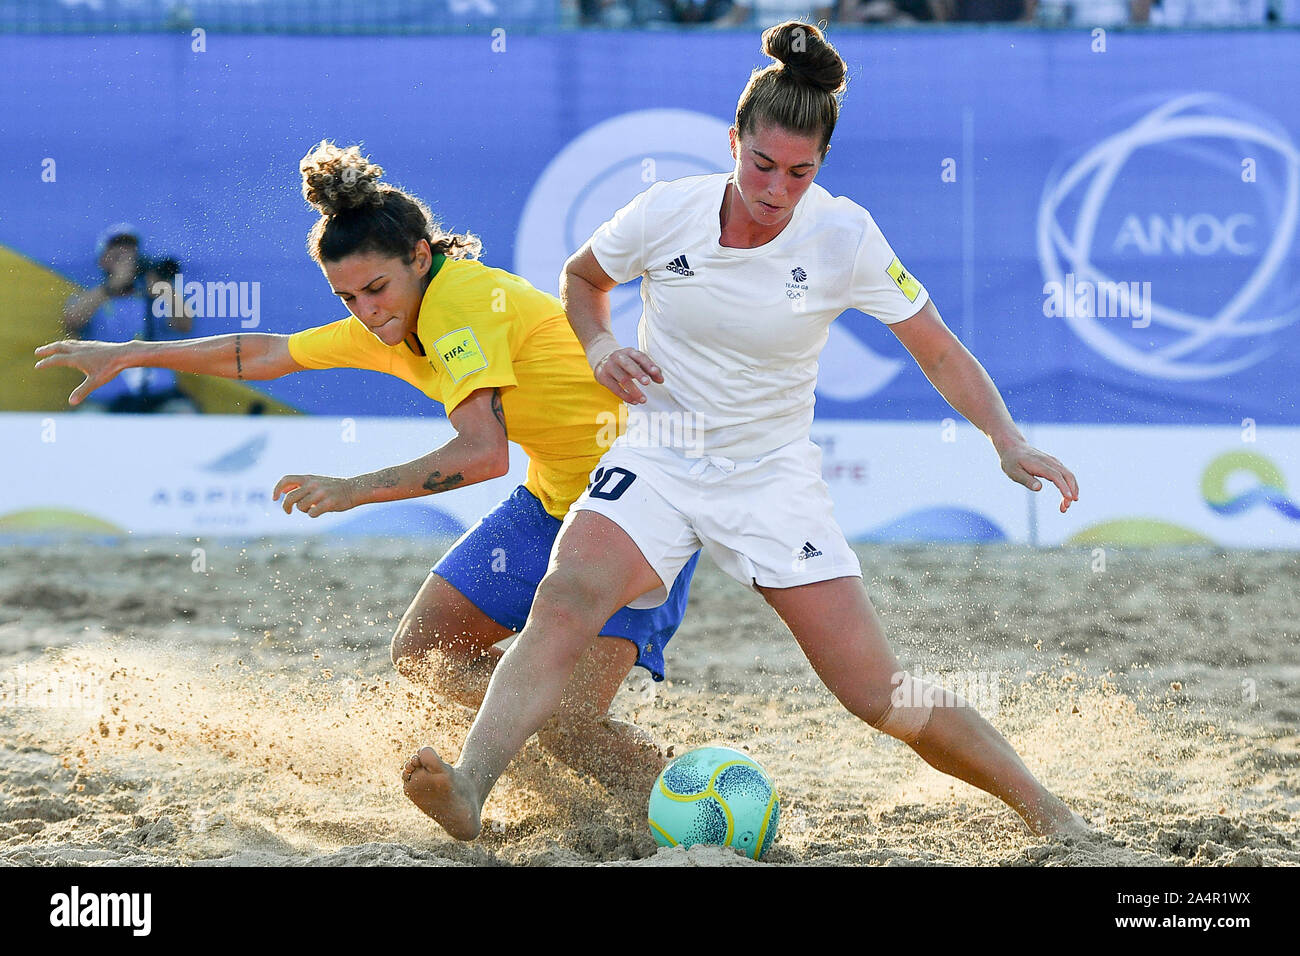 Doha, Qatar. 15th Oct, 2019. Leticia Villar Pais (L) of Brazil vies with Molly Lacey Clark (R) of Great Britain during the women's beach soccer semifinal at the 1st ANOC World Beach Games in Doha, capital of Qatar, Oct. 15, 2019. Credit: Nikku/Xinhua/Alamy Live News Stock Photo